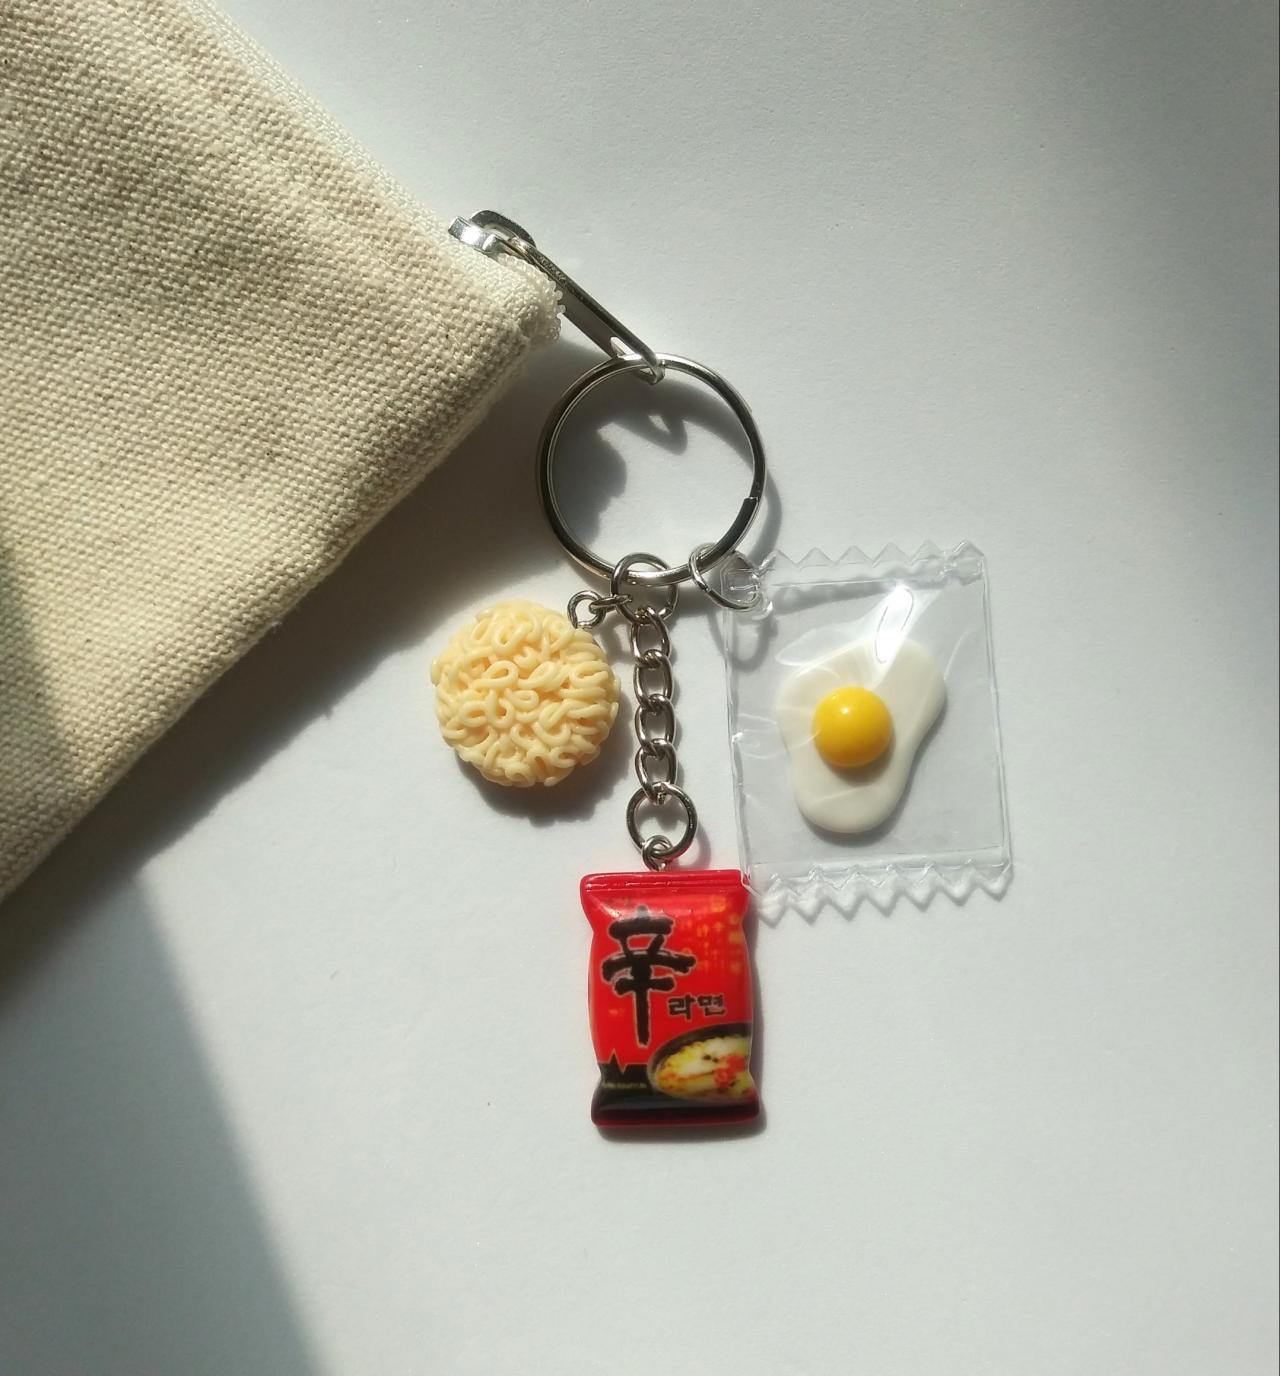 Korean 辛shin Ramen Noodles Packet And Egg In A Bag Keychain, Funny Keychain, Miniature Food Keychain